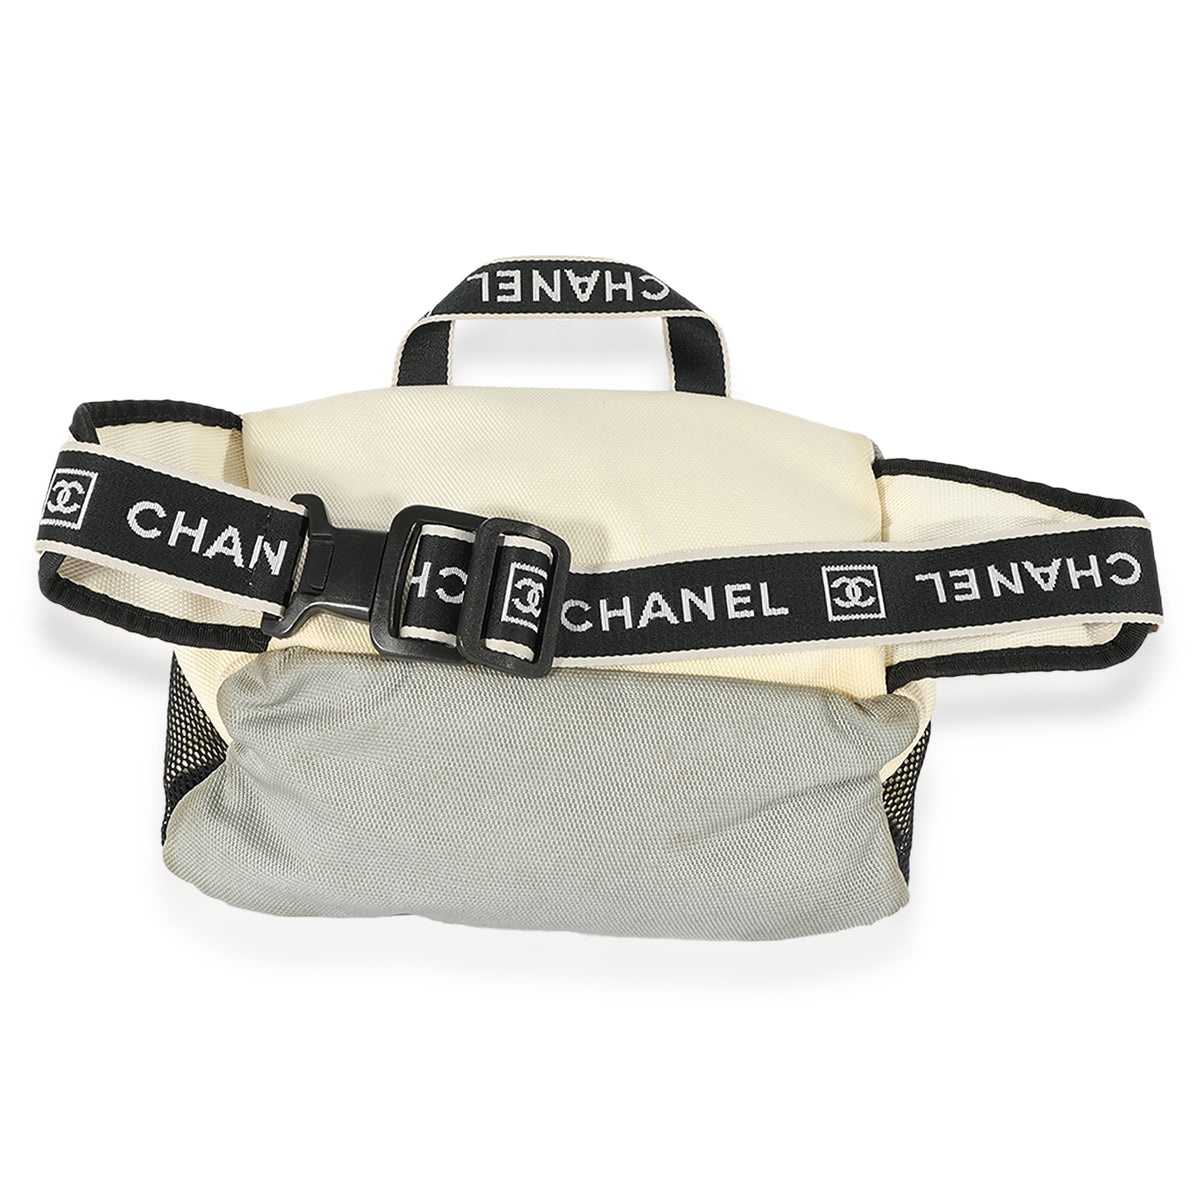 Chanel Belt Extra Large Sports Cc Logo Fanny Pack Waist Pouch